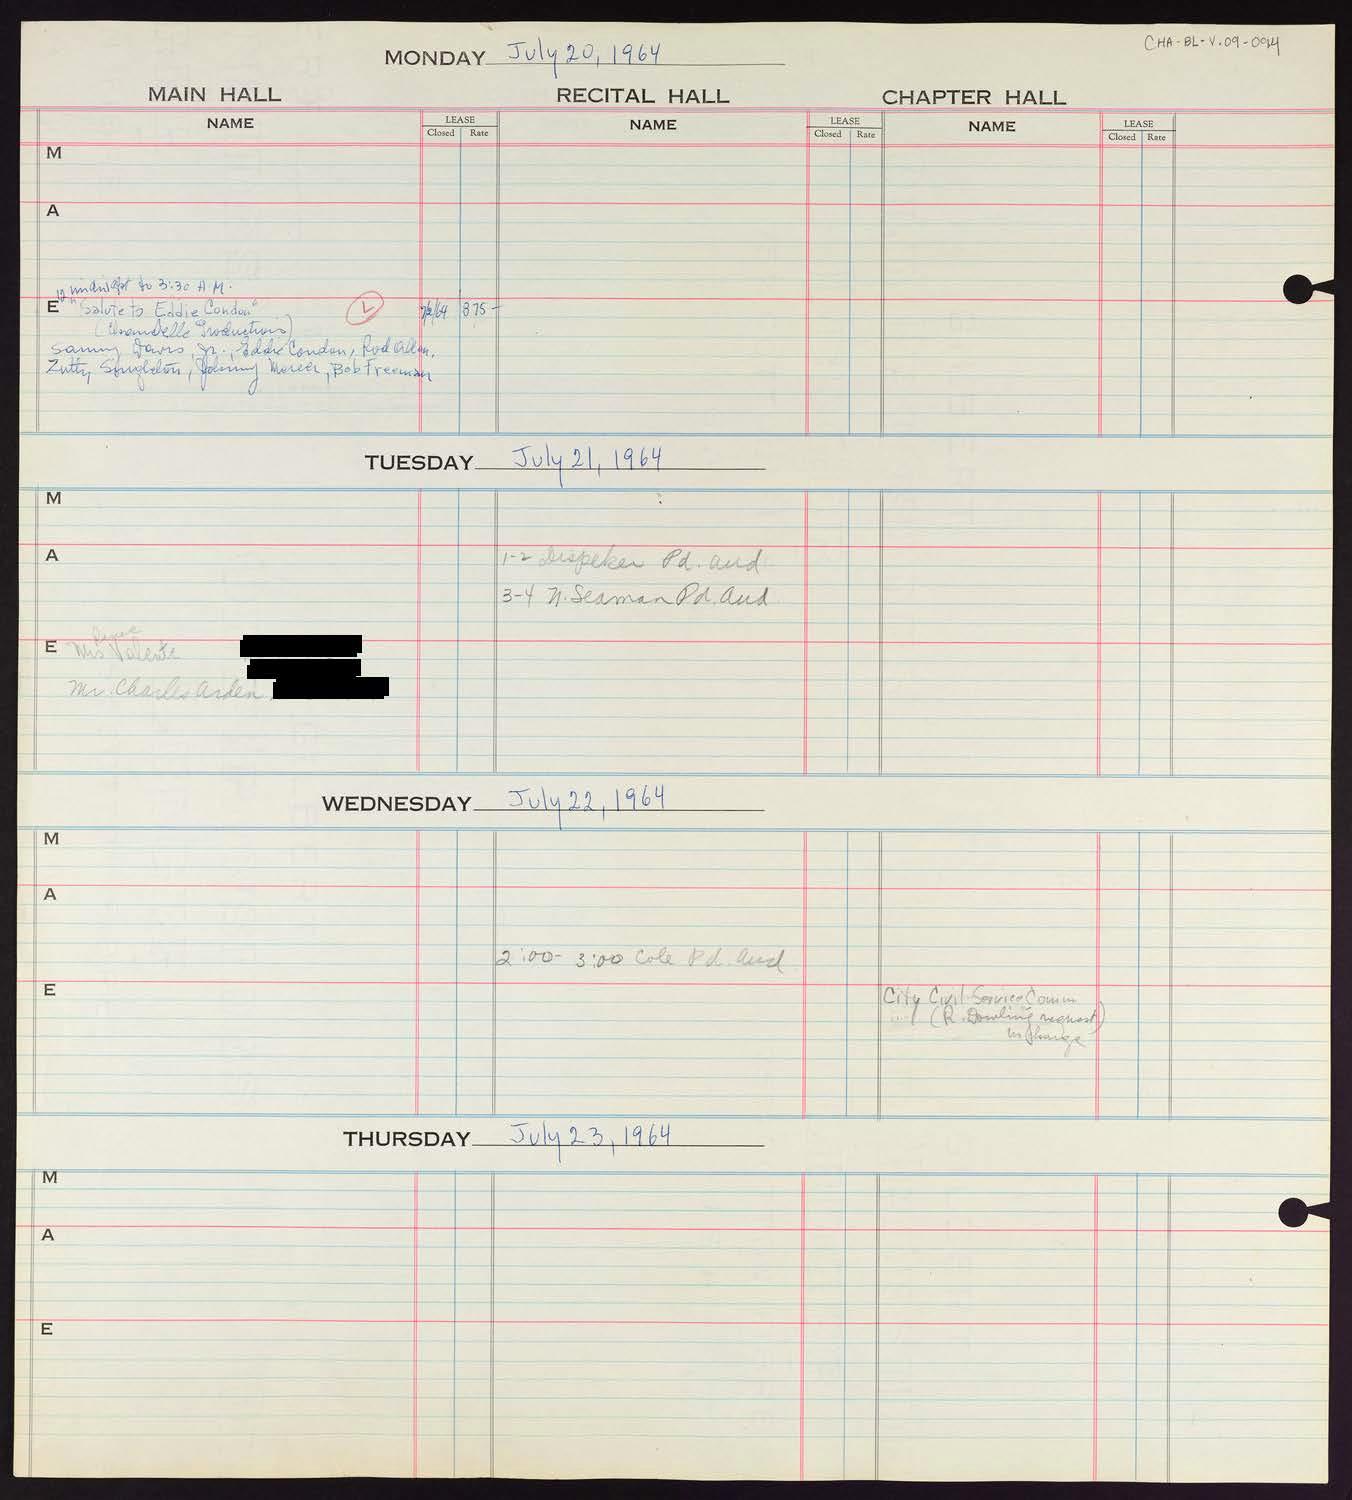 Carnegie Hall Booking Ledger, volume 9, page 94